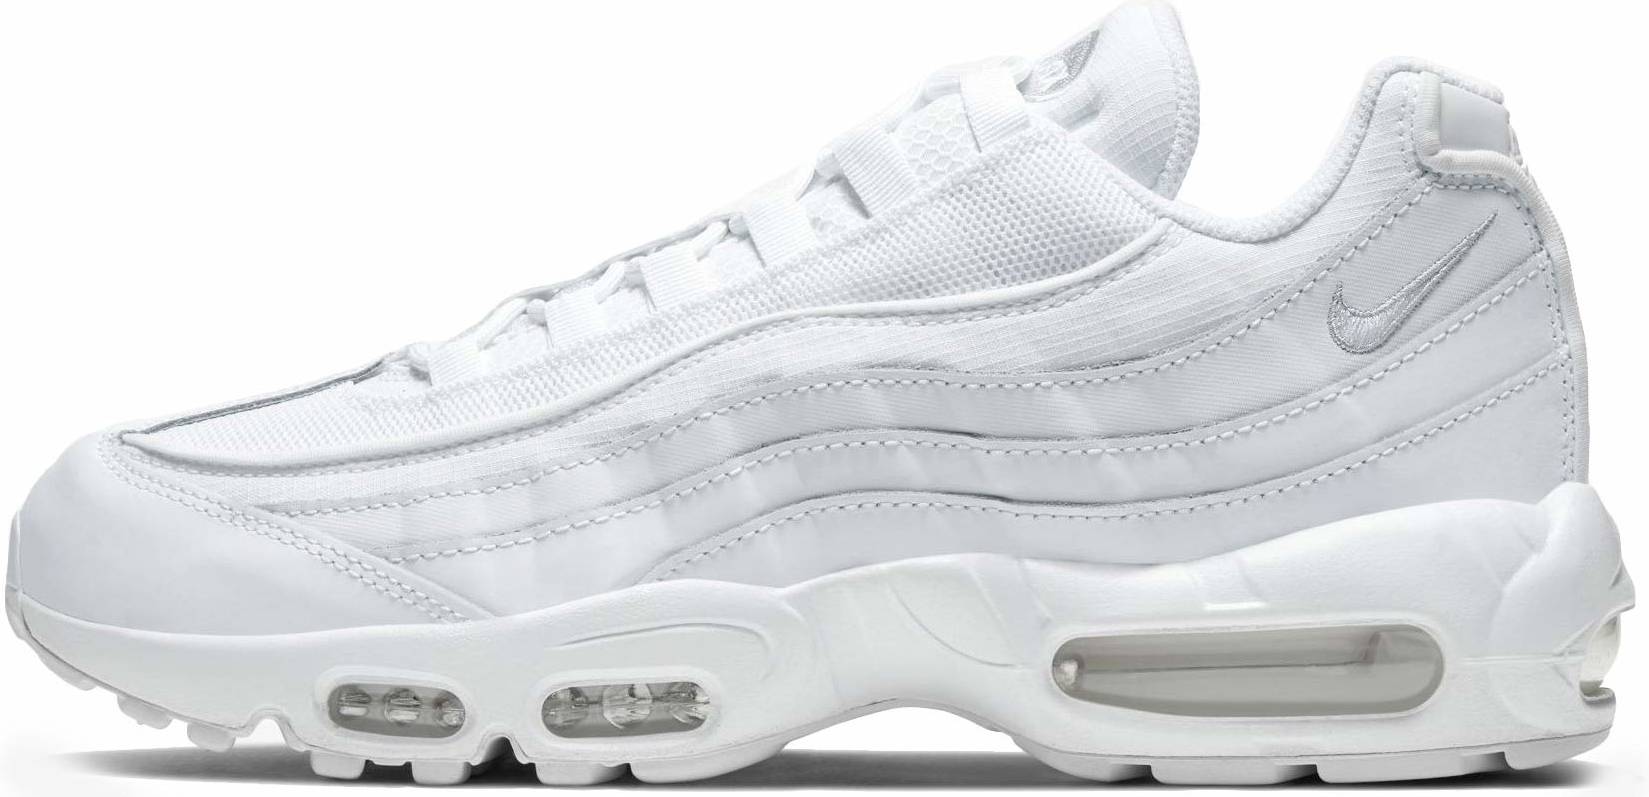 Nike Air Max 95 Essential sneakers in 30+ colors (only $100 